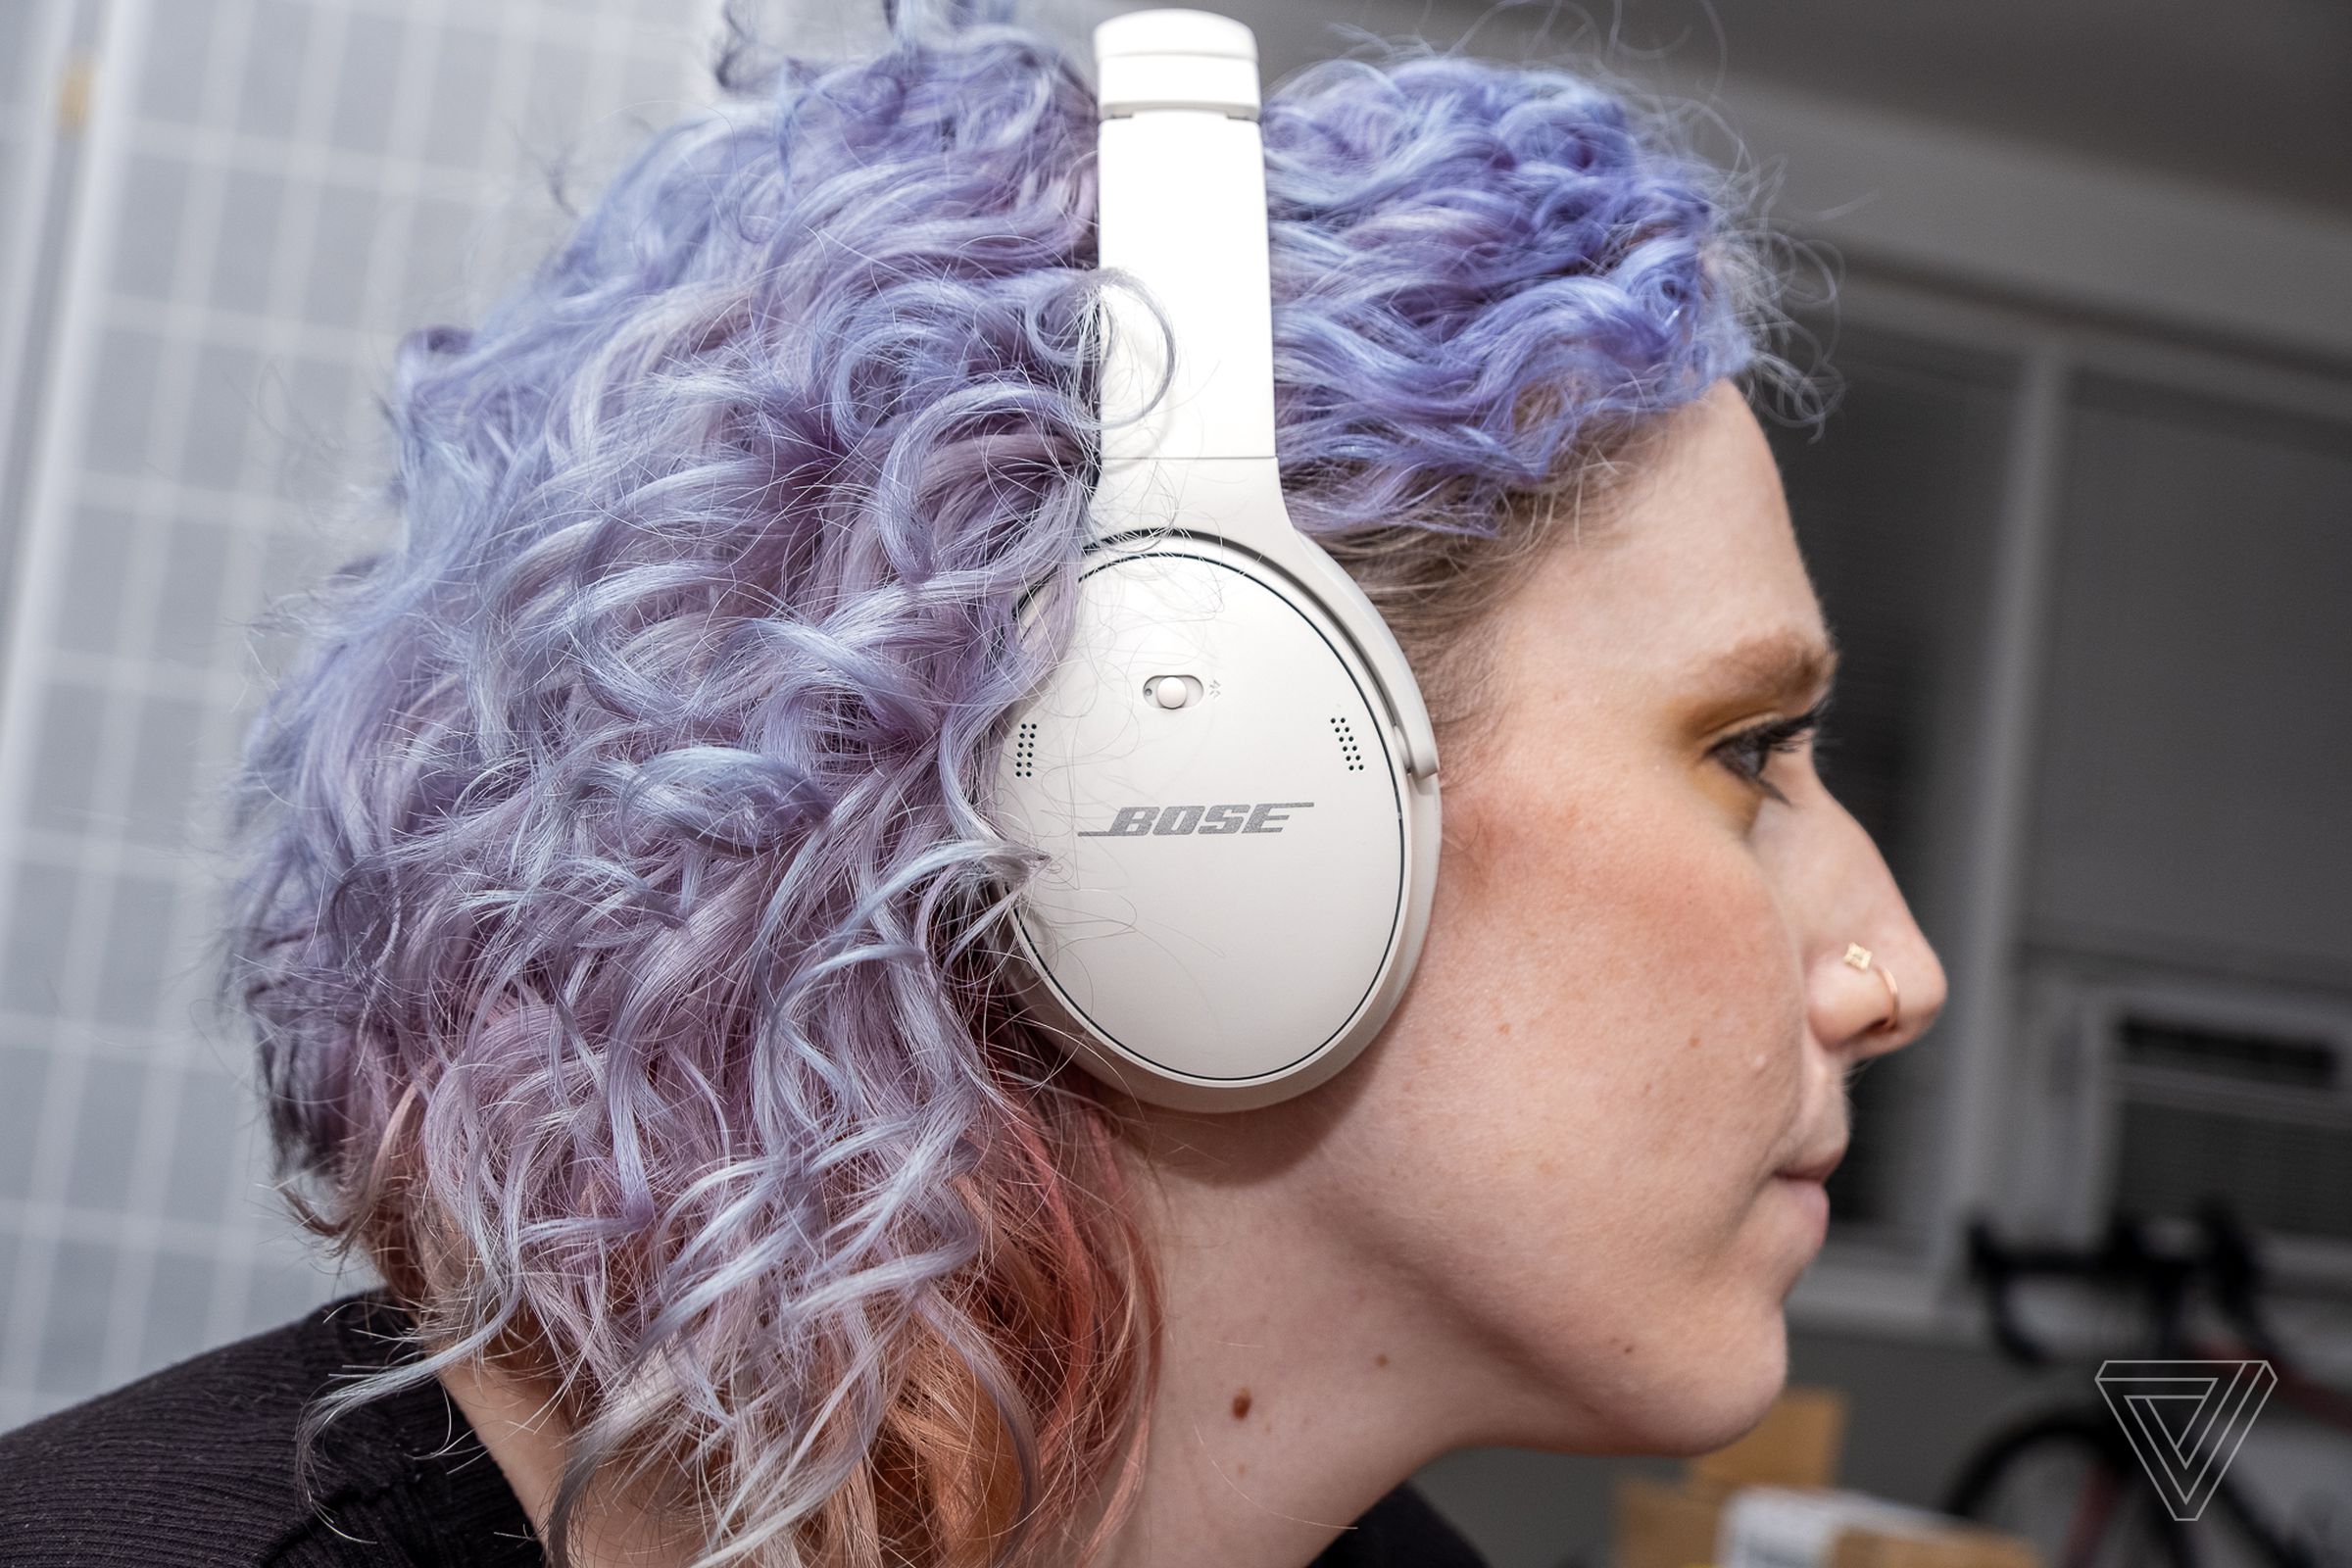 You’ll have a hard time finding a more comfortable pair of headphones.